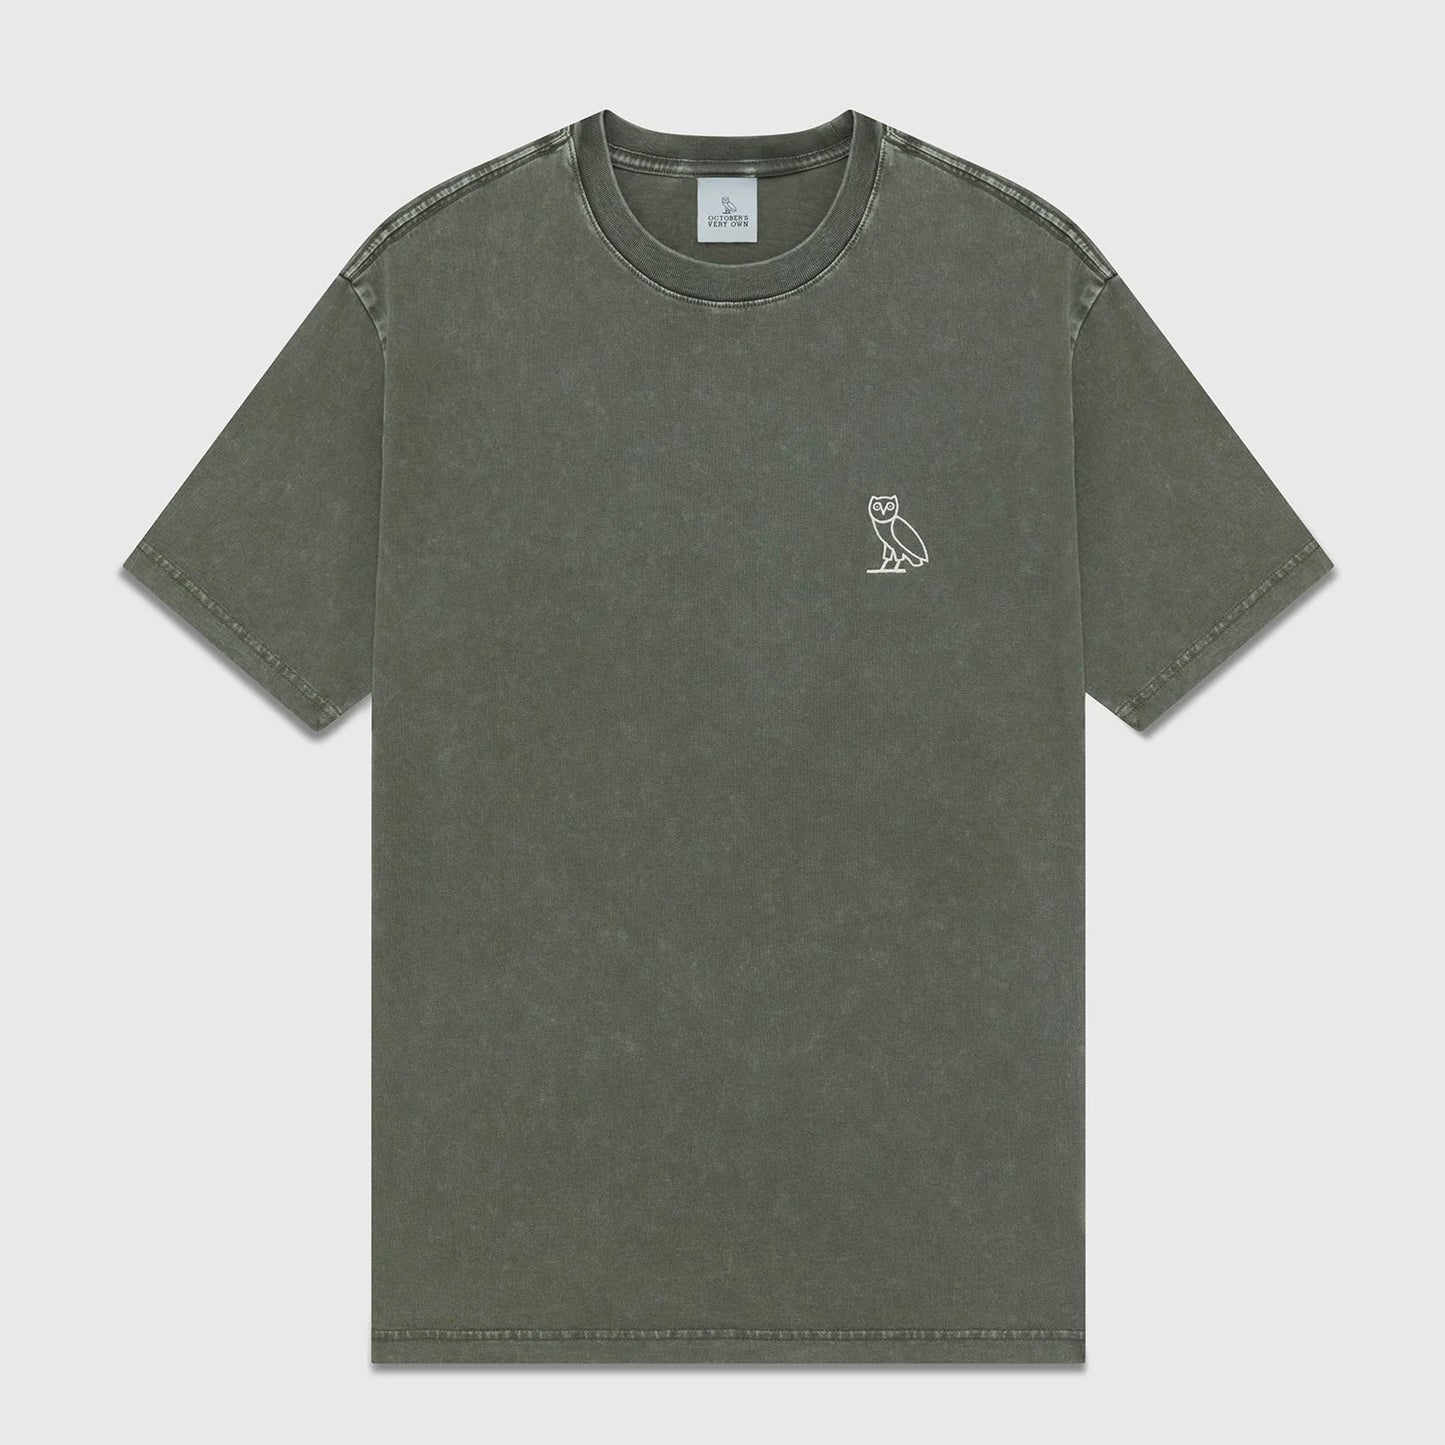 OVO Washed Green T-Shirt Front VIew